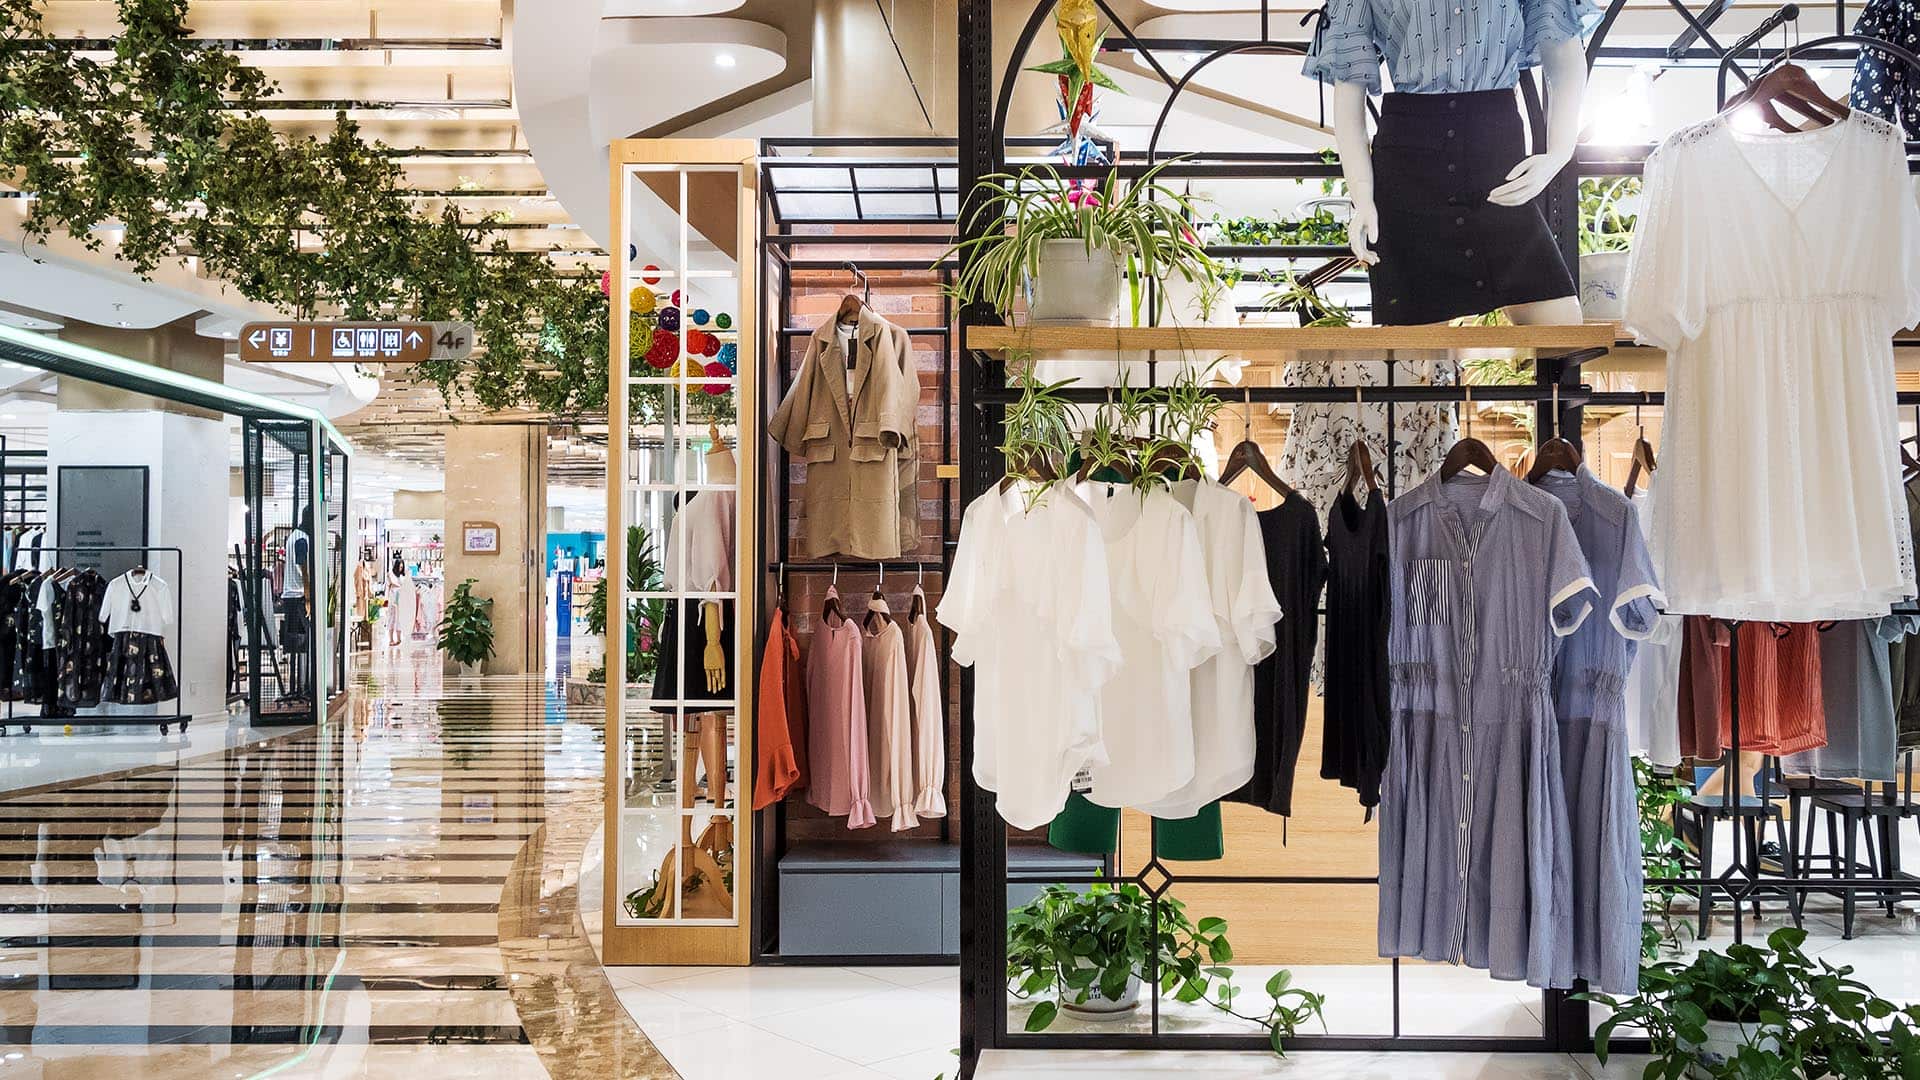 Direct-to-Consumer channels like pop-up stores are gaining popularity